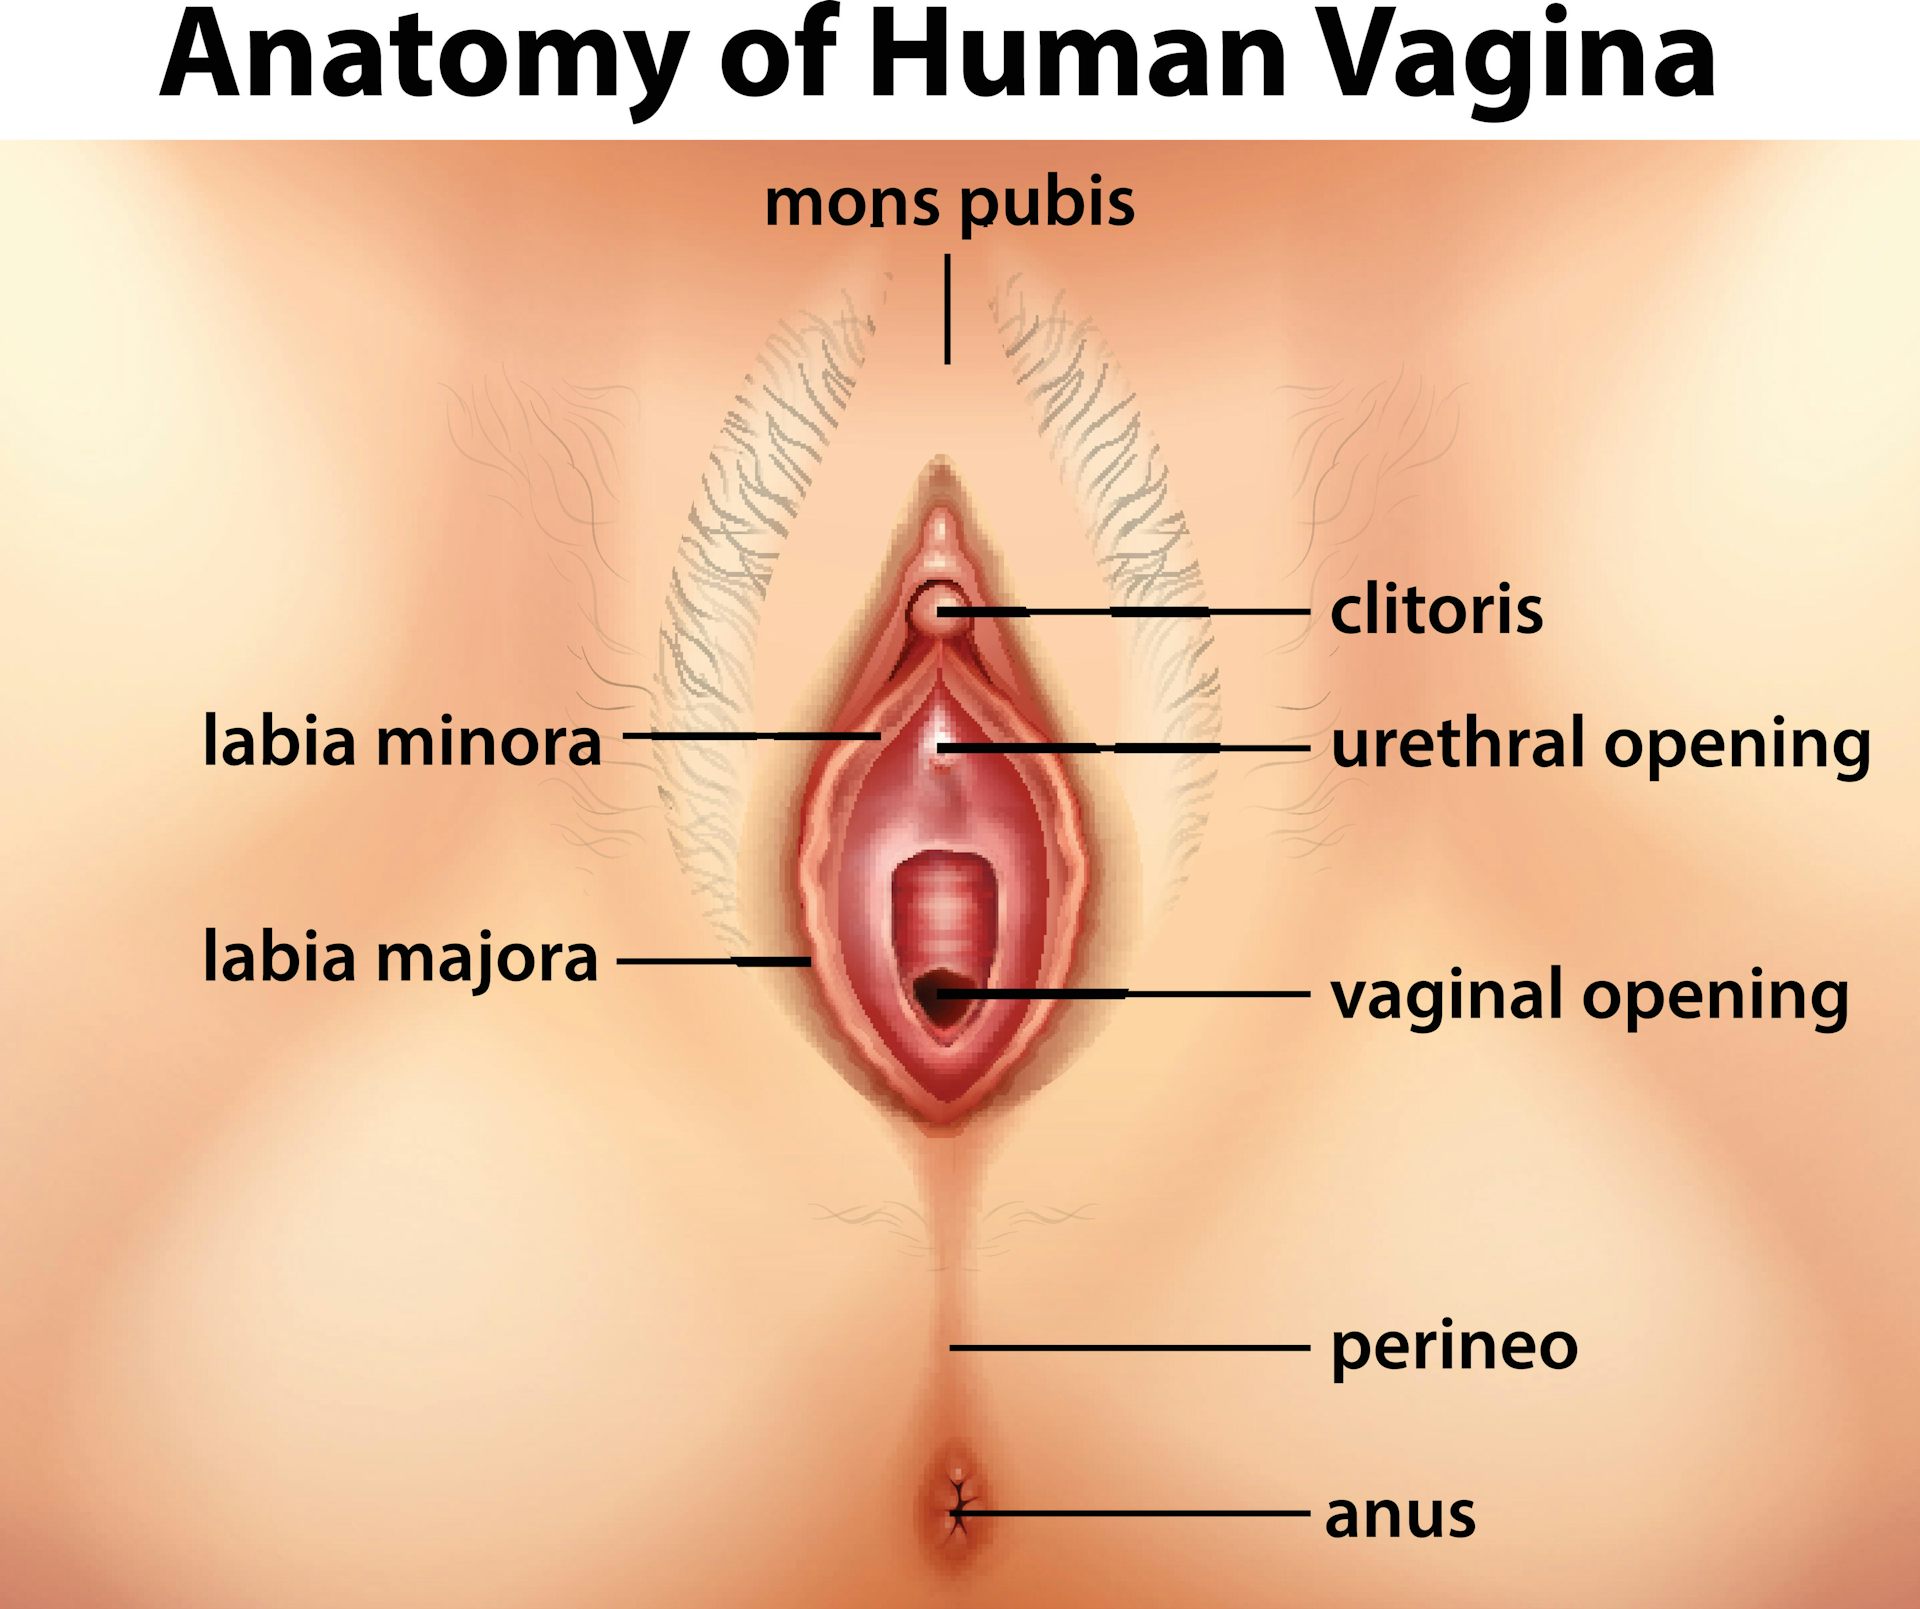 cynthia zufall recommends pic of vagina pic